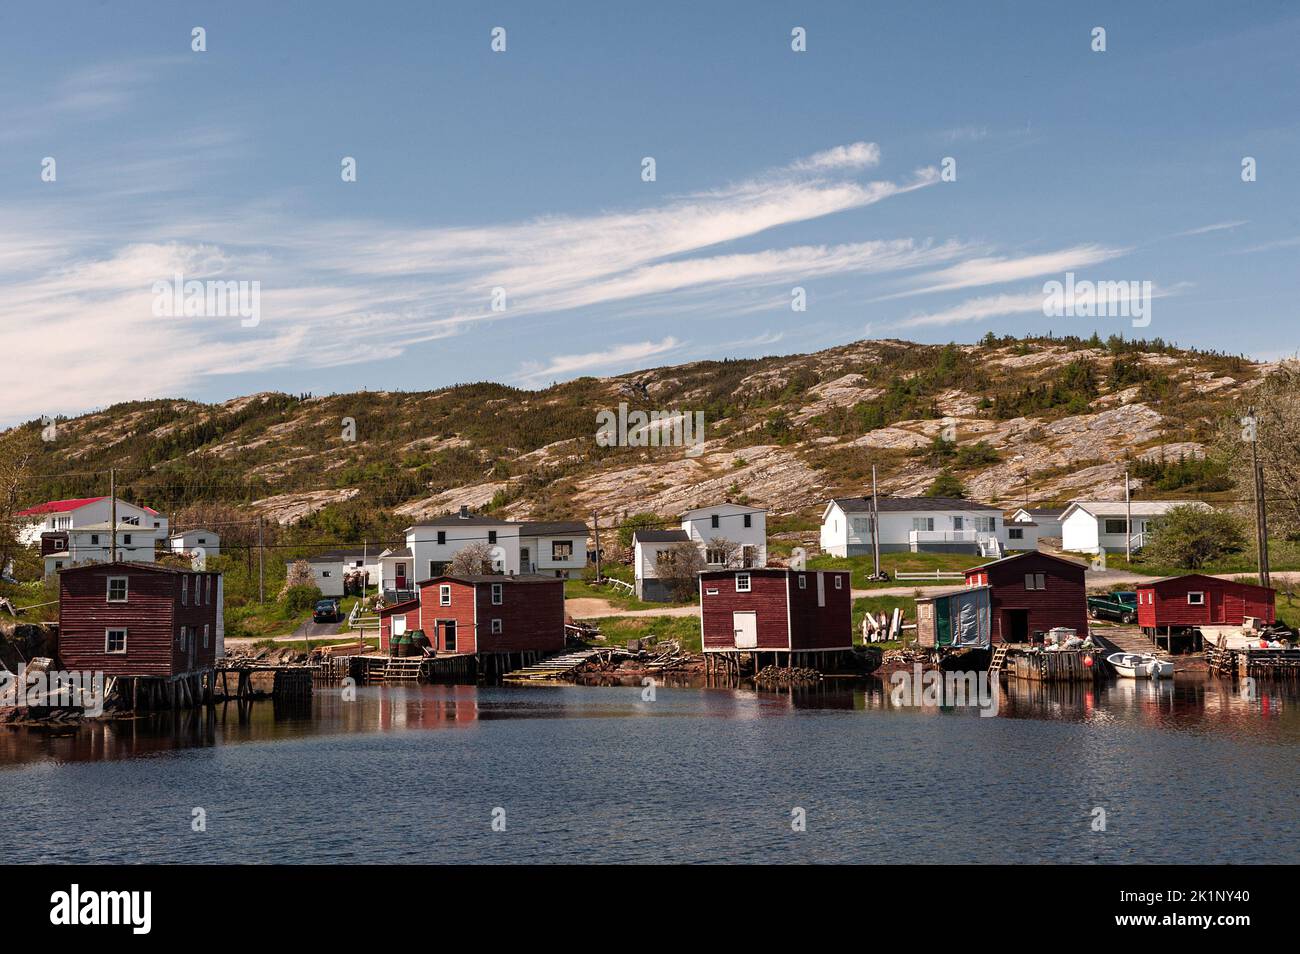 Typical outport community along the east coast of Newfoundland Stock Photo